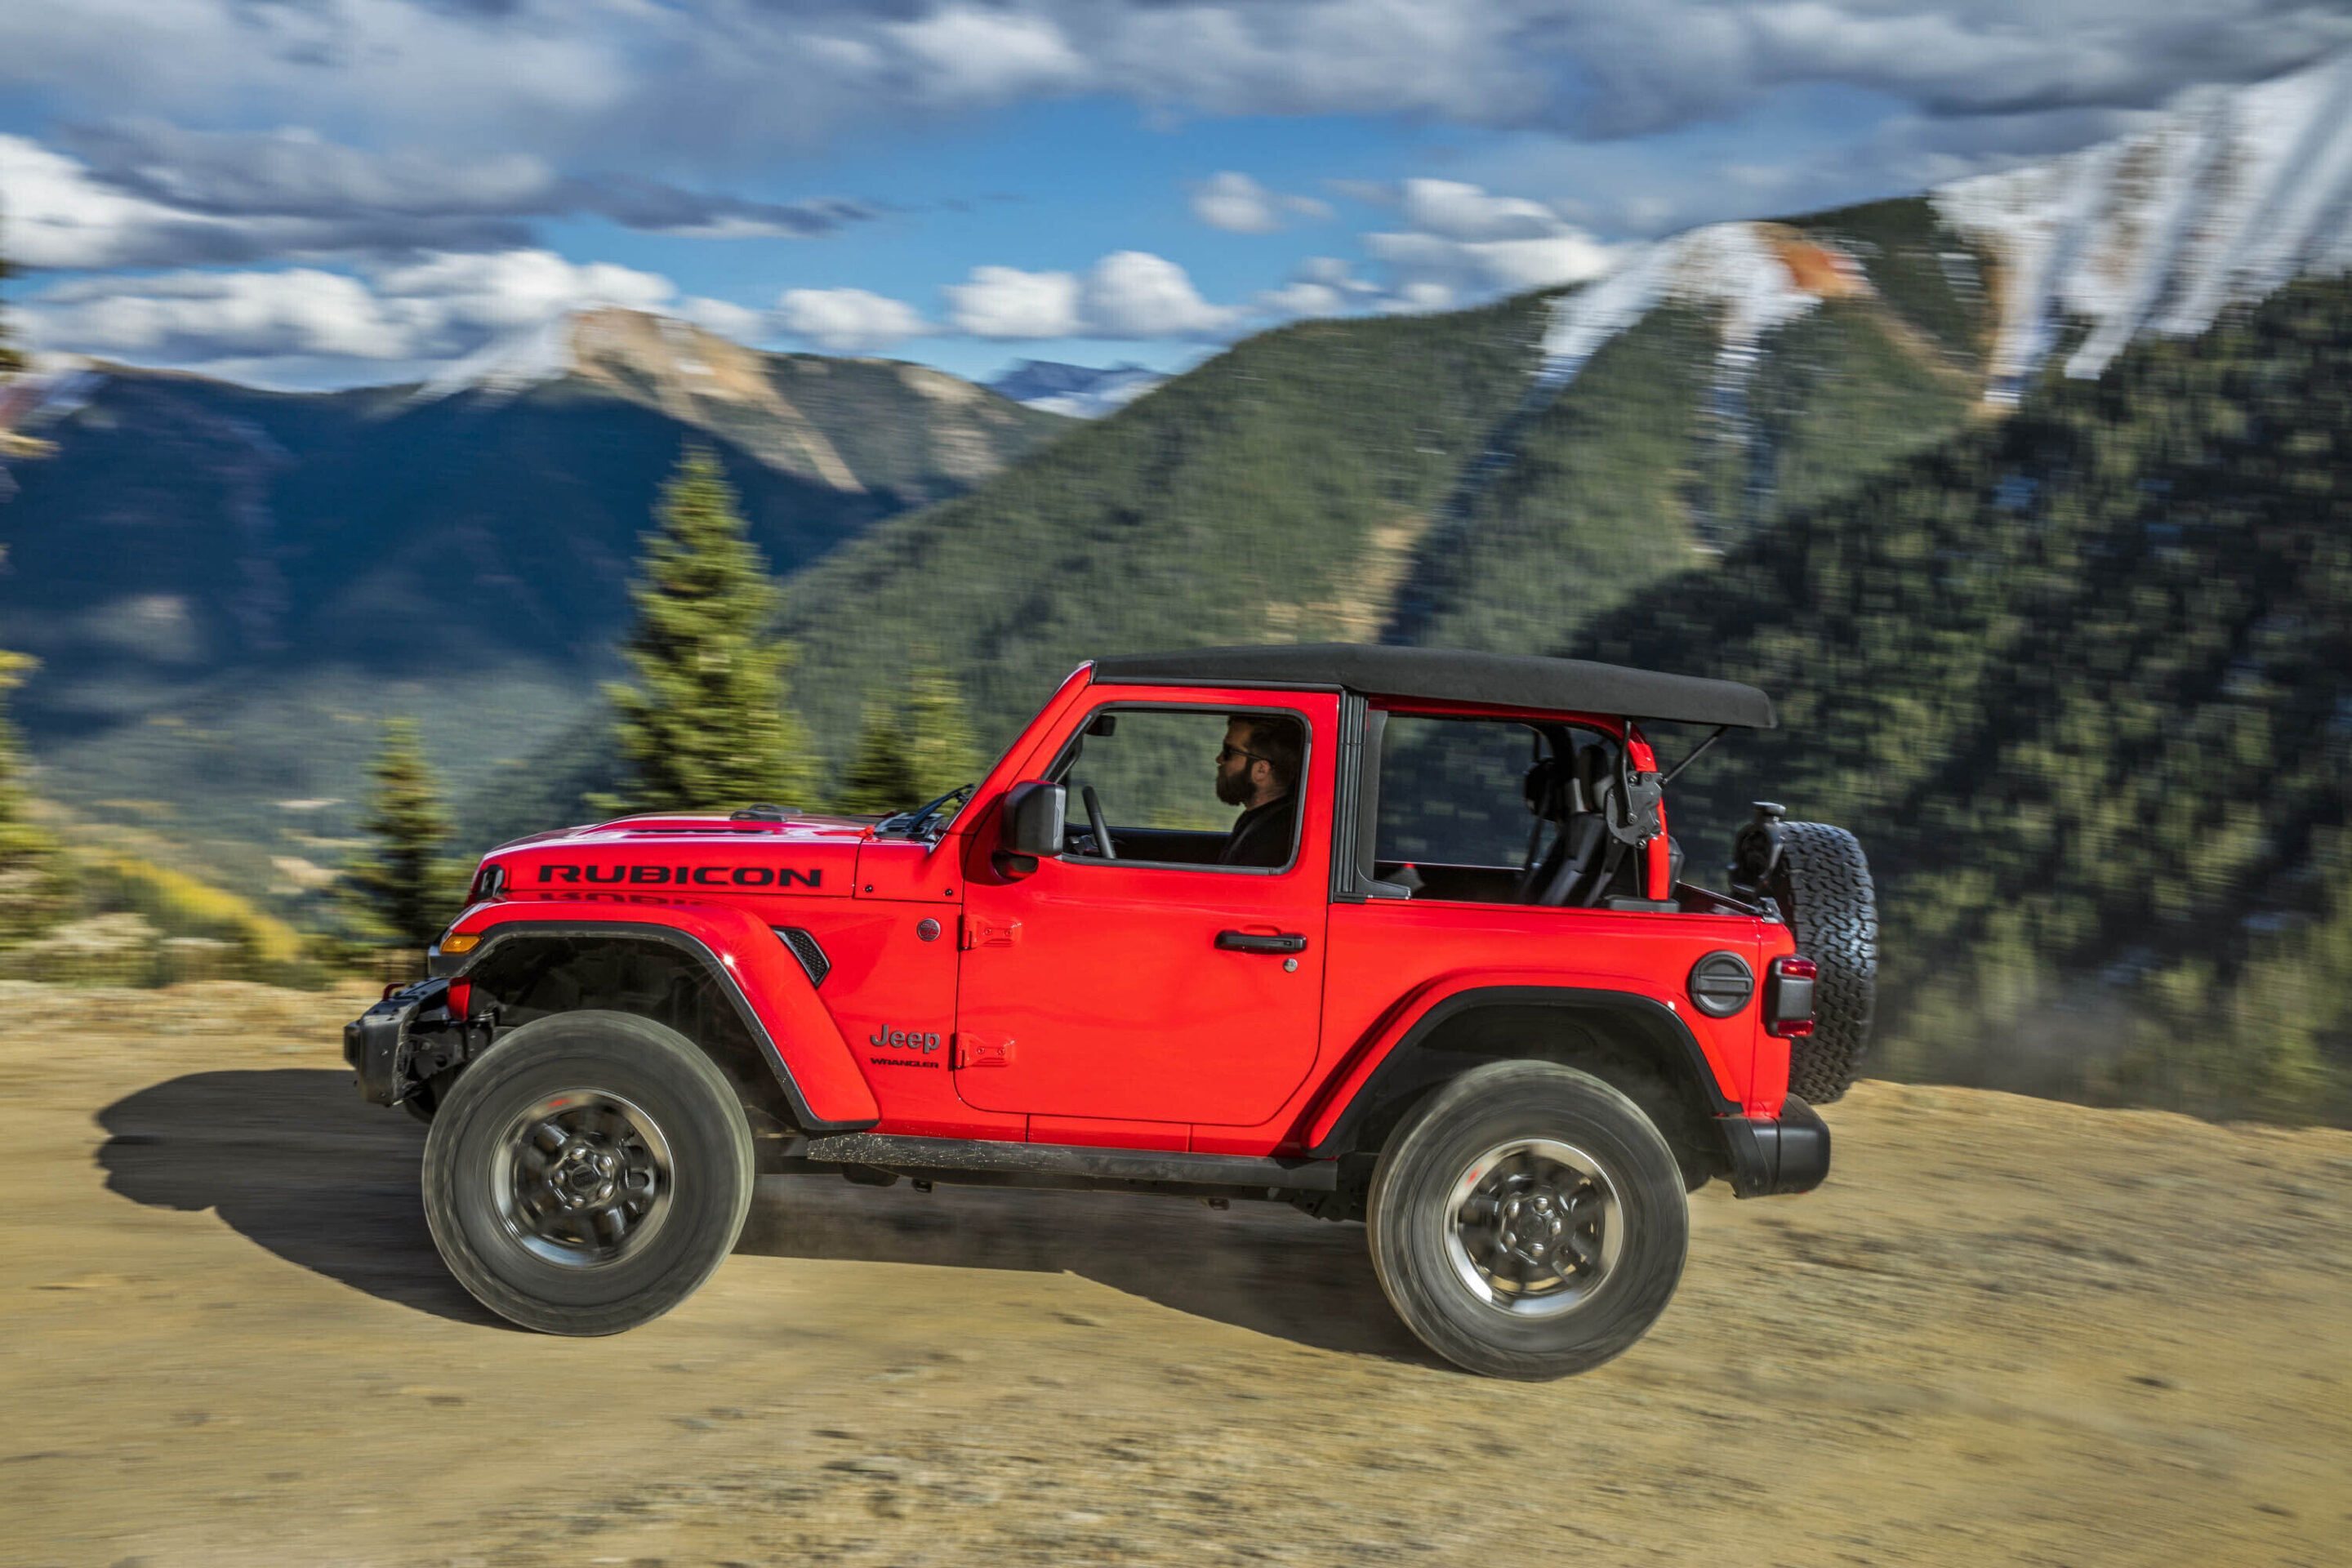 Edmunds: The top off-road vehicles for 2021